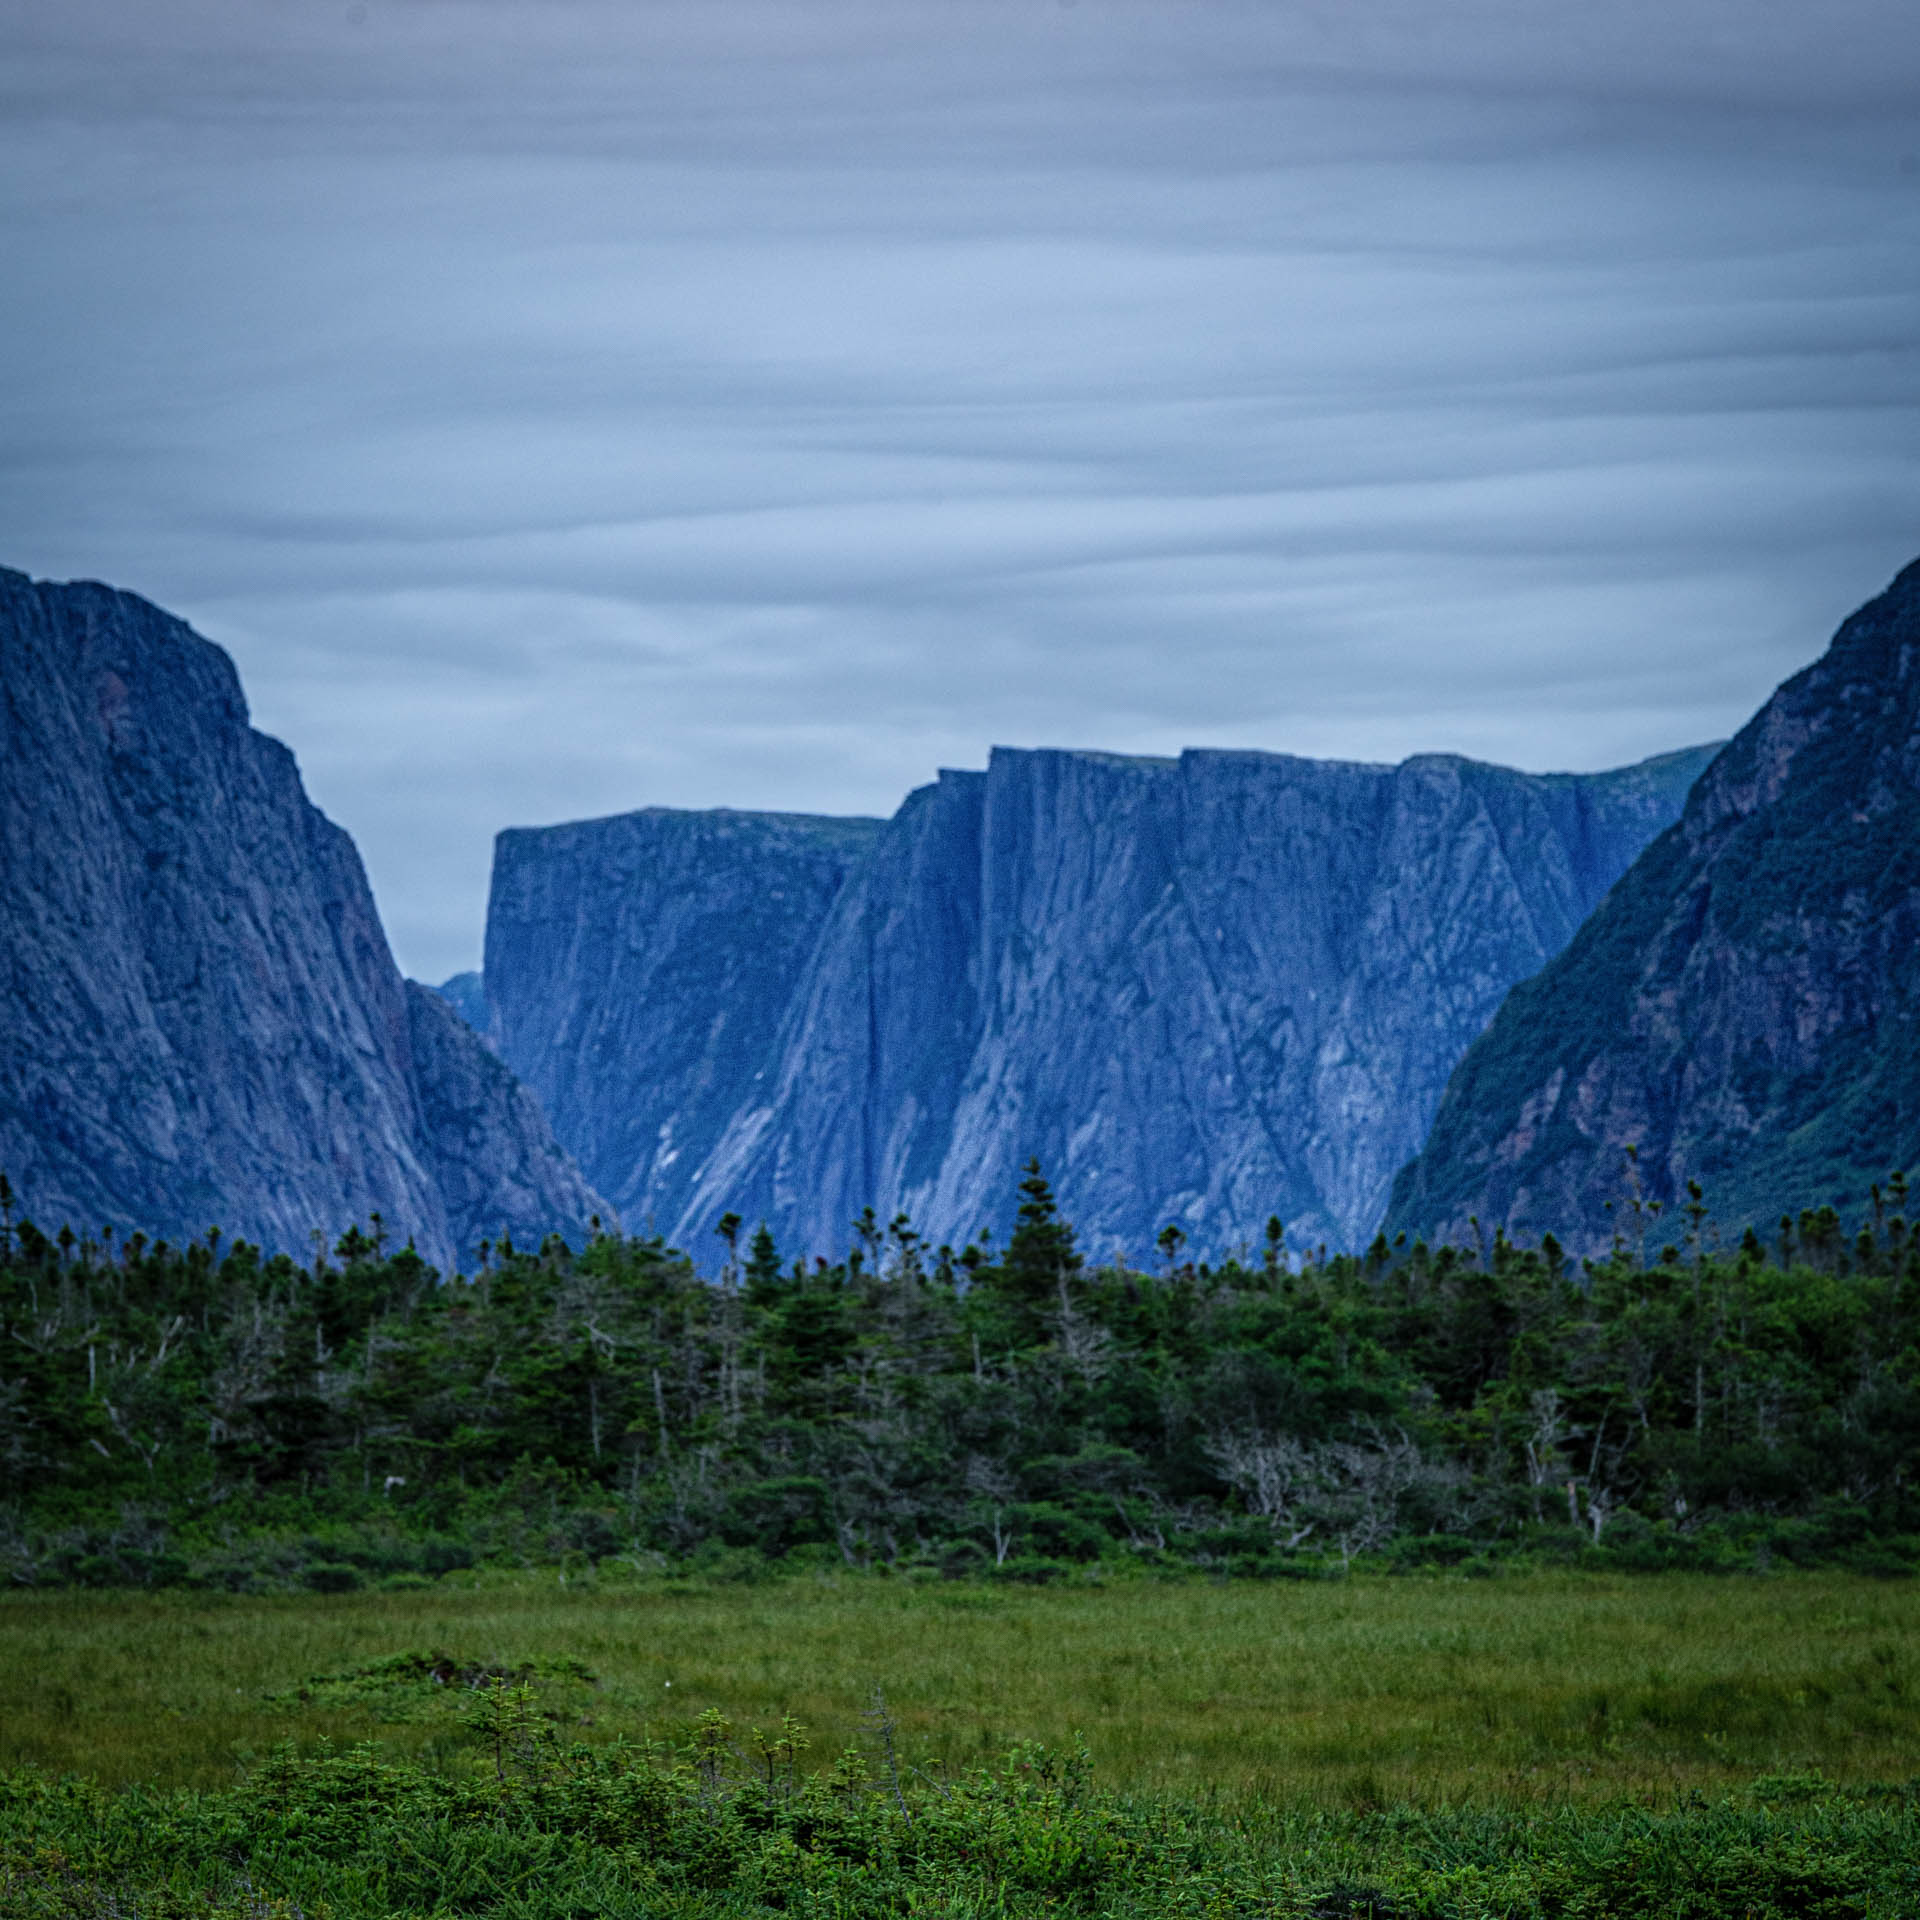 Entrance to the Western Brook Pond Fjord